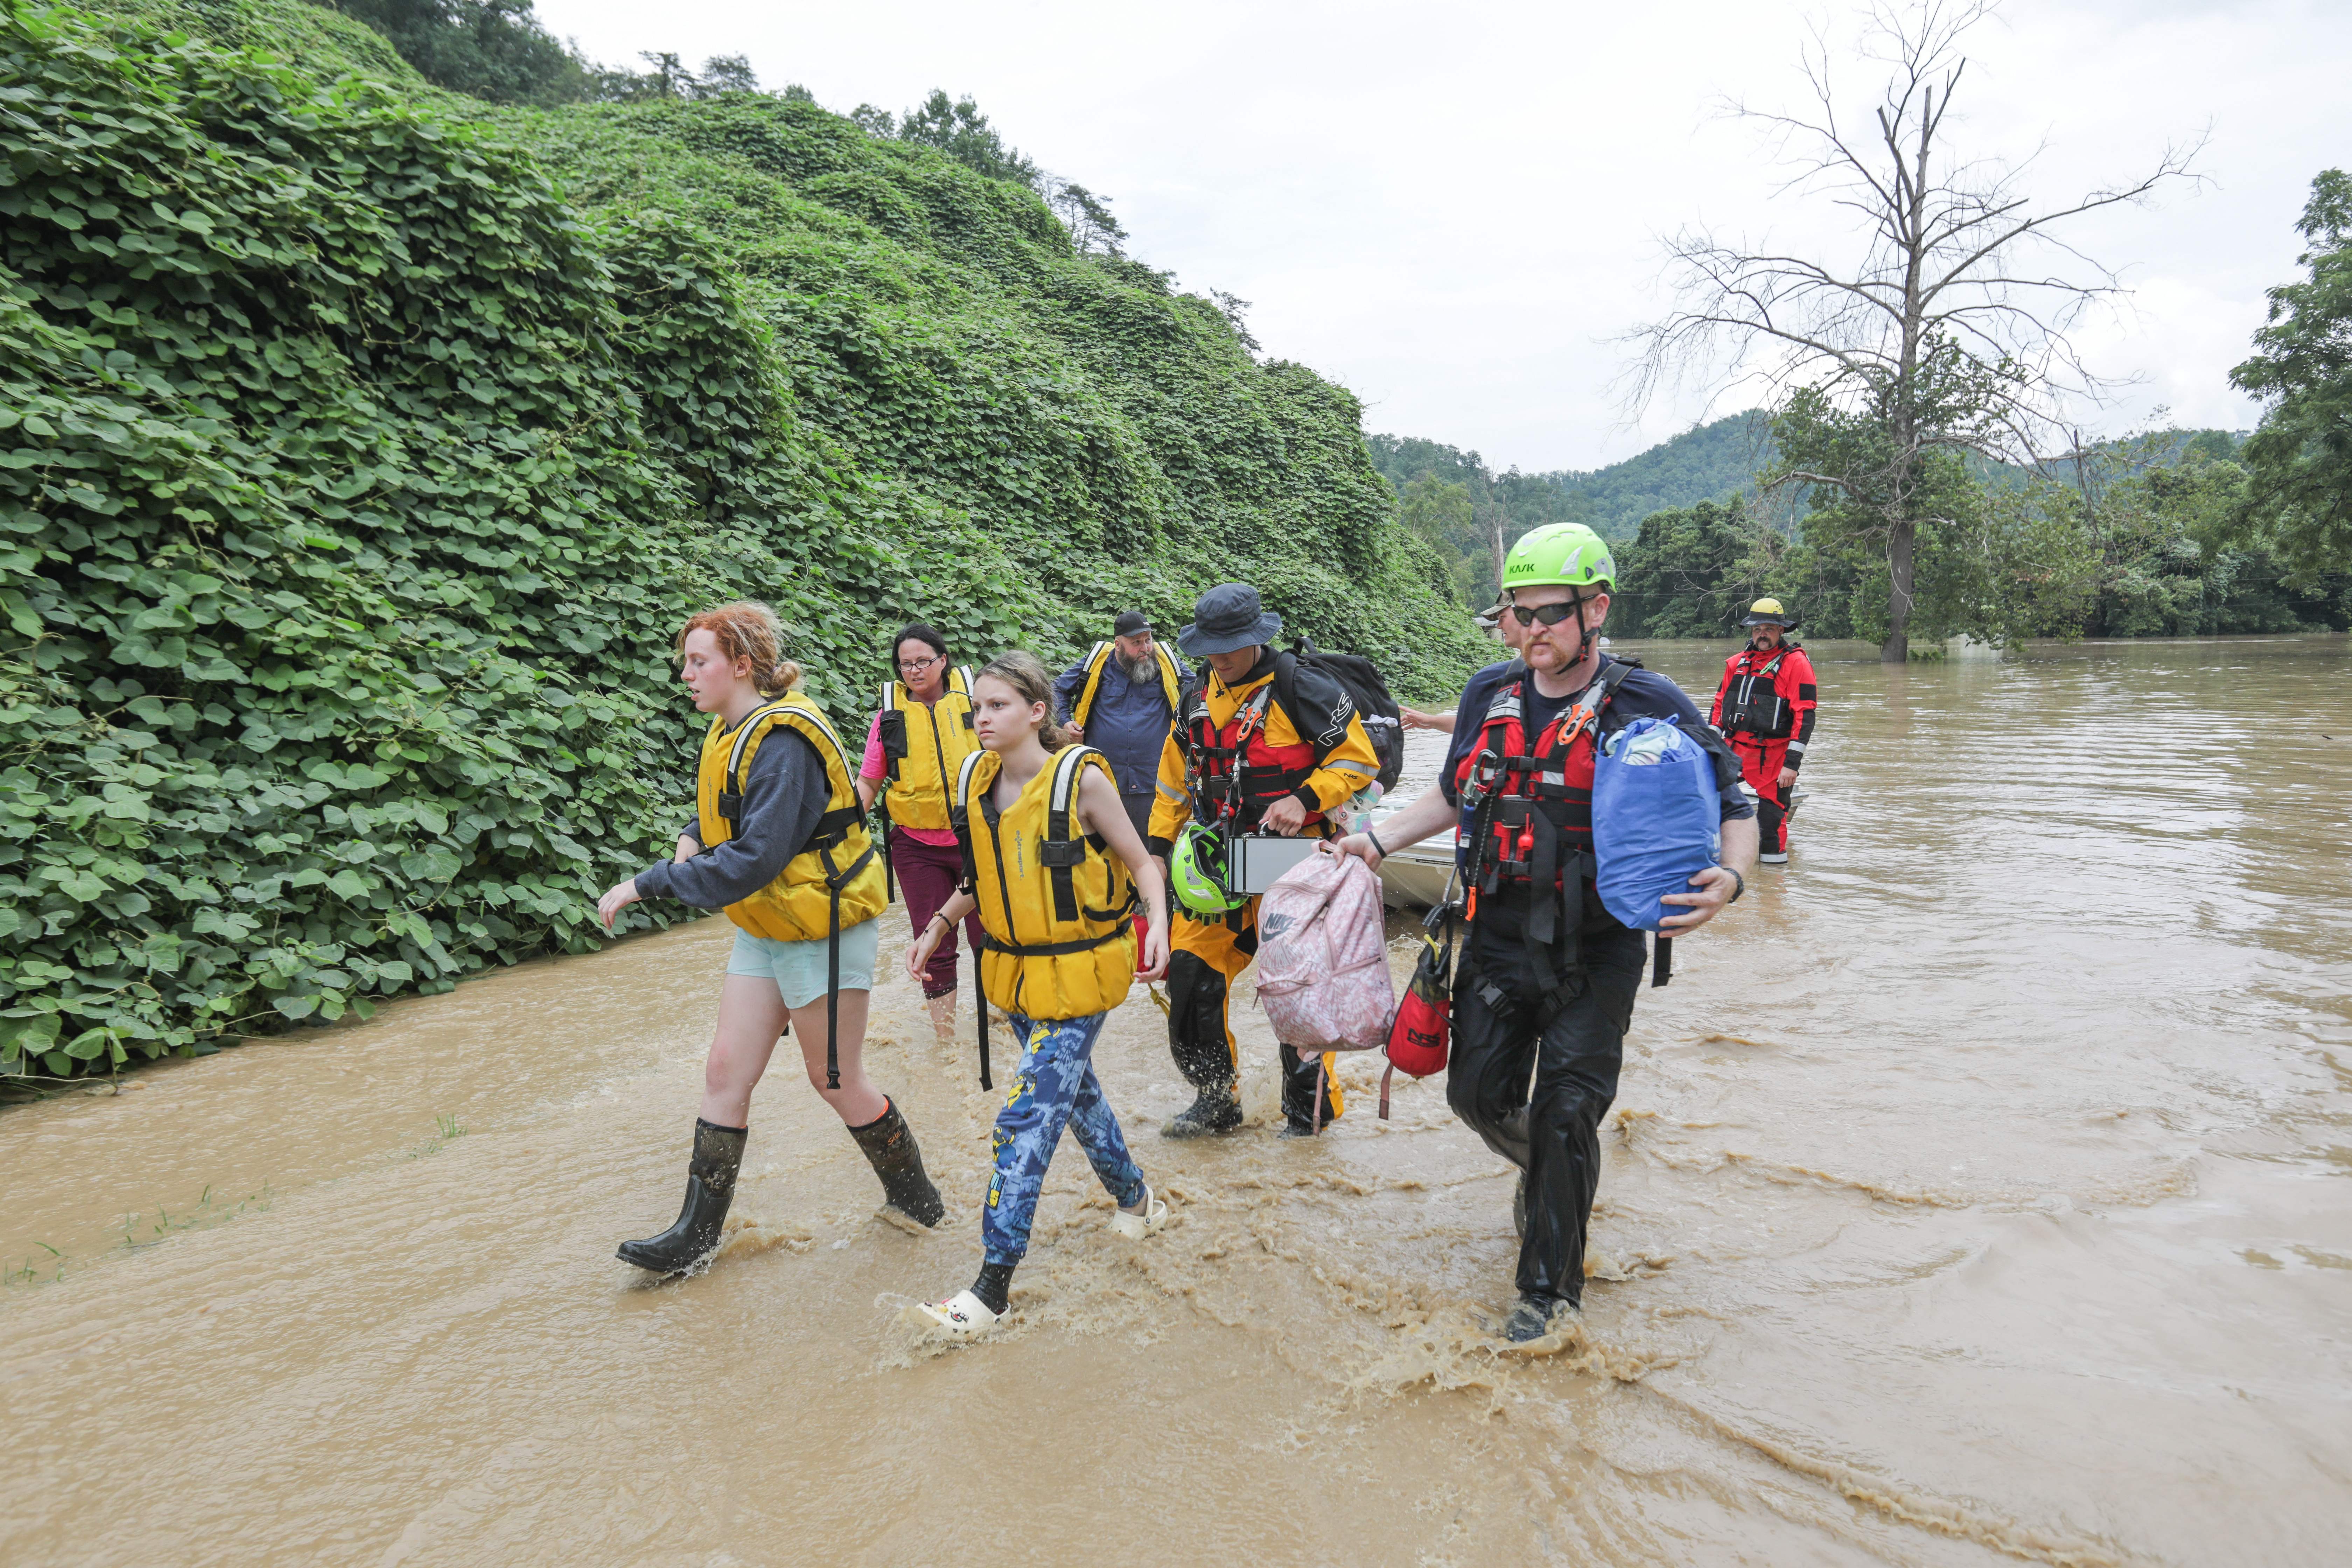 A group of stranded people are rescued from the floodwaters of the North Fork of the Kentucky River in Jackson, Kentucky on July 28.